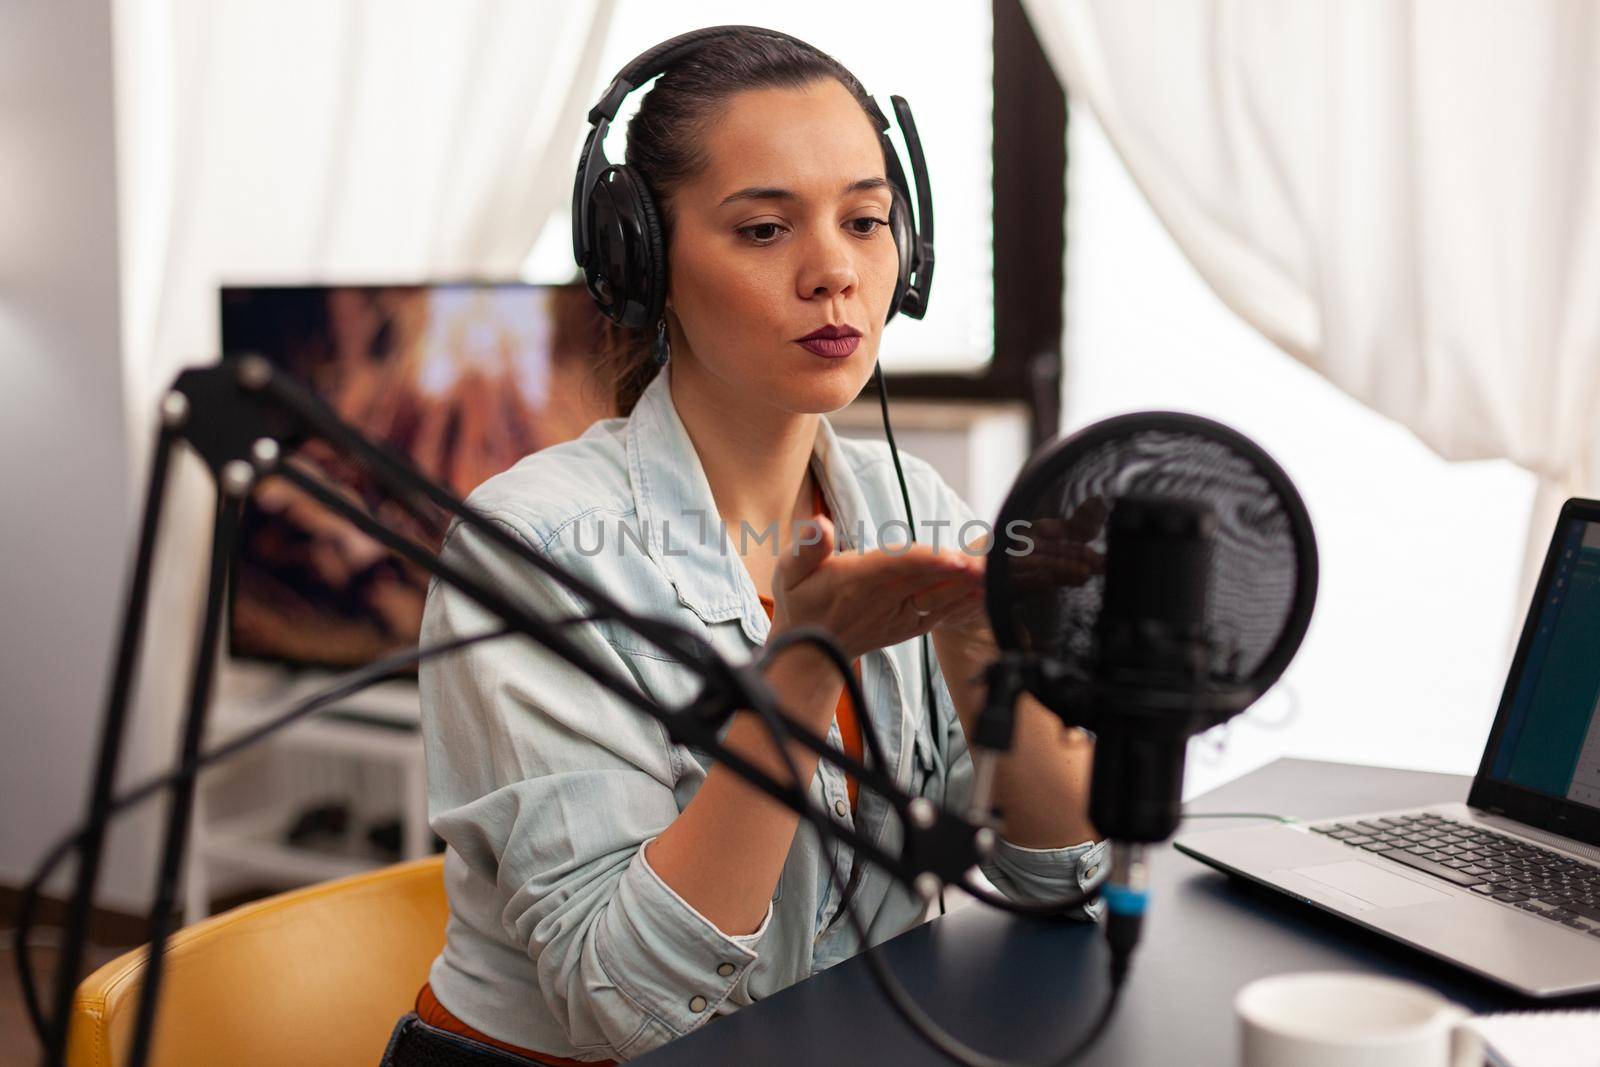 Influencer content creator blowing kisses in digital marketing concepts. Blogger speaking and recording online talk show at studio using headset, professional microphone looking at camera for podcast